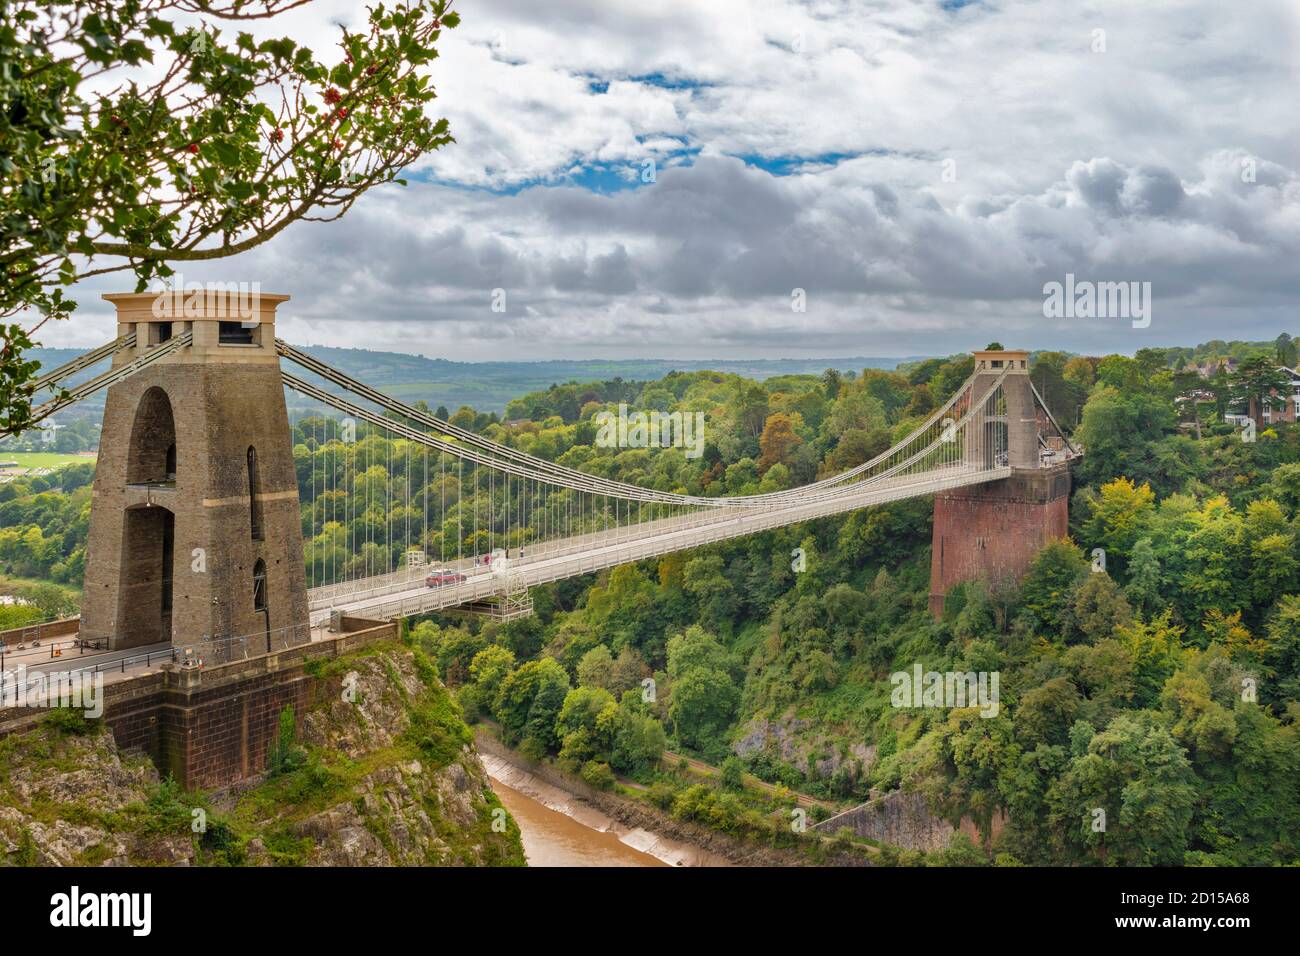 BRISTOL CITY CENTRE ENGLAND BRUNELS CLIFTON SUSPENSION BRIDGE OVER THE AVON GORGE AND RIVER AVON IN LATE SUMMER Stock Photo